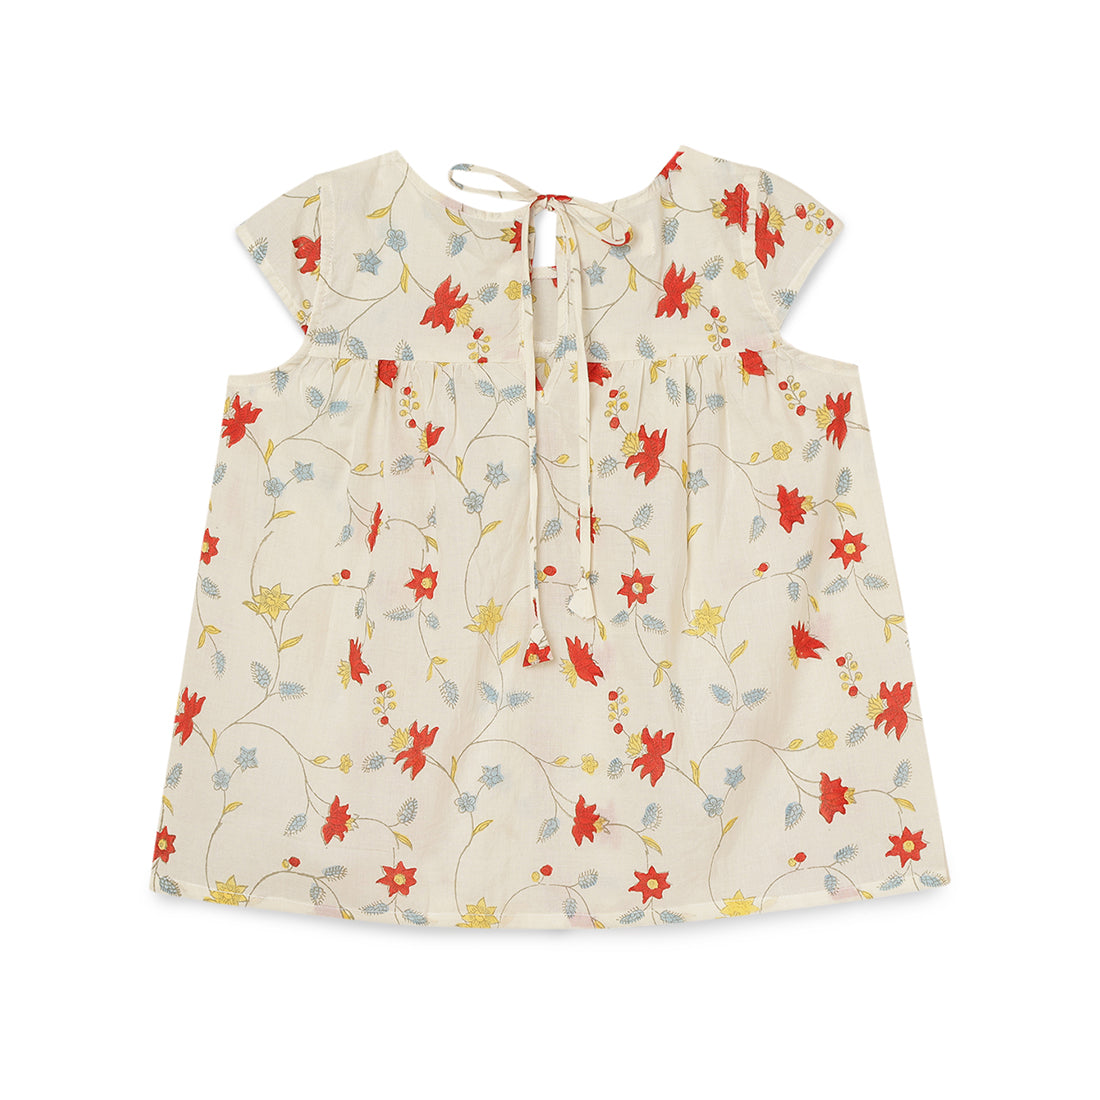 Girls Top and Shorts Set with Poppy Print 2 yrs to 6 yrs - Back